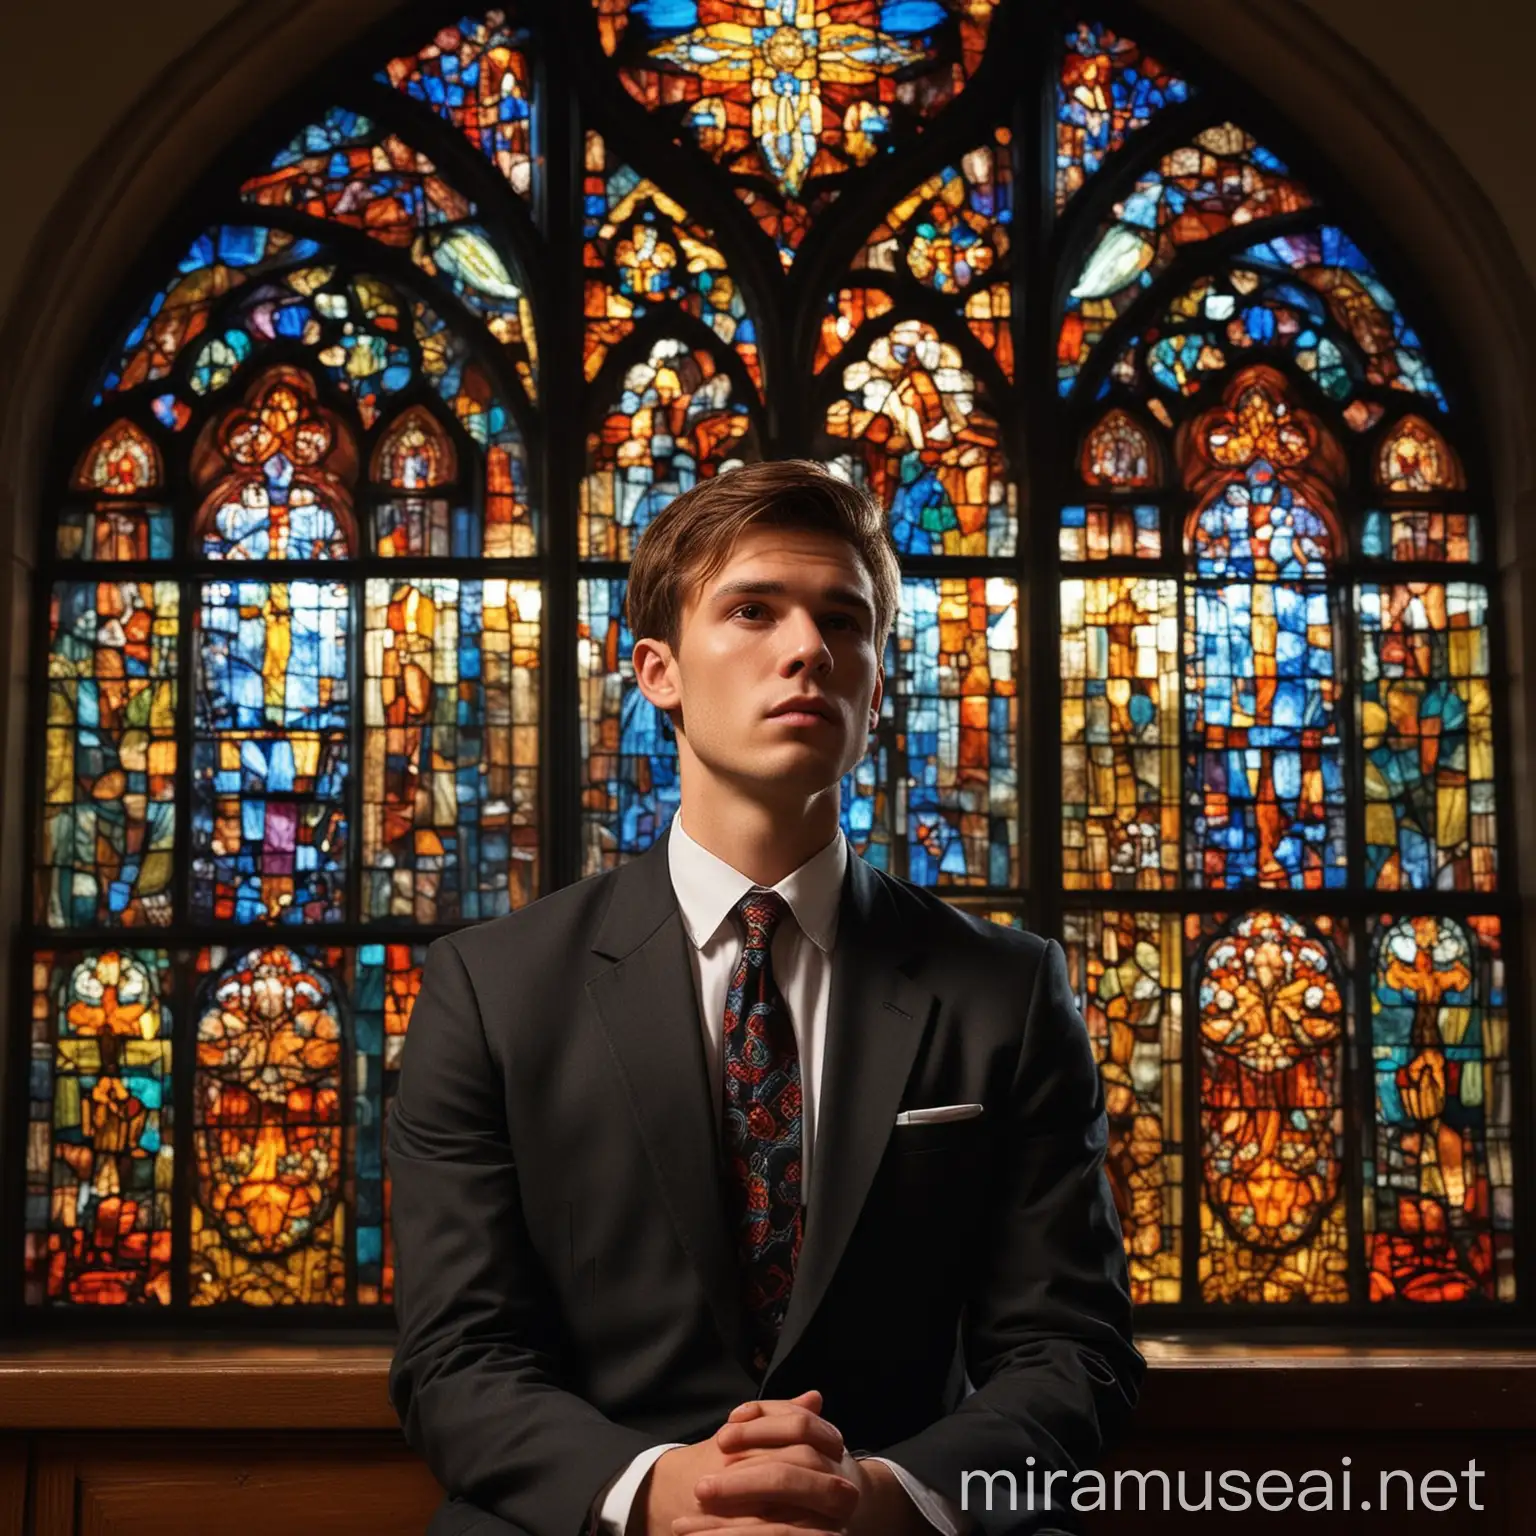 Create a visual arts artwork depicting a 27-year-old man with brown hair, wearing a formal suit, sitting in a church illuminated by vibrant stained glass windows. The man should exude a sense of contemplation and introspection, with a subtle expression of awe and reverence as he gazes at the intricate patterns of light and color streaming through the stained glass. The church interior should be intricately detailed, capturing the grandeur and solemnity of the space, with attention to architectural elements such as arches, pillars, and religious symbols. The stained glass windows should be the focal point, showcasing a kaleidoscope of colors that cast dynamic reflections on the man's face and clothing, enhancing the atmosphere of spiritual transcendence and artistic beauty.